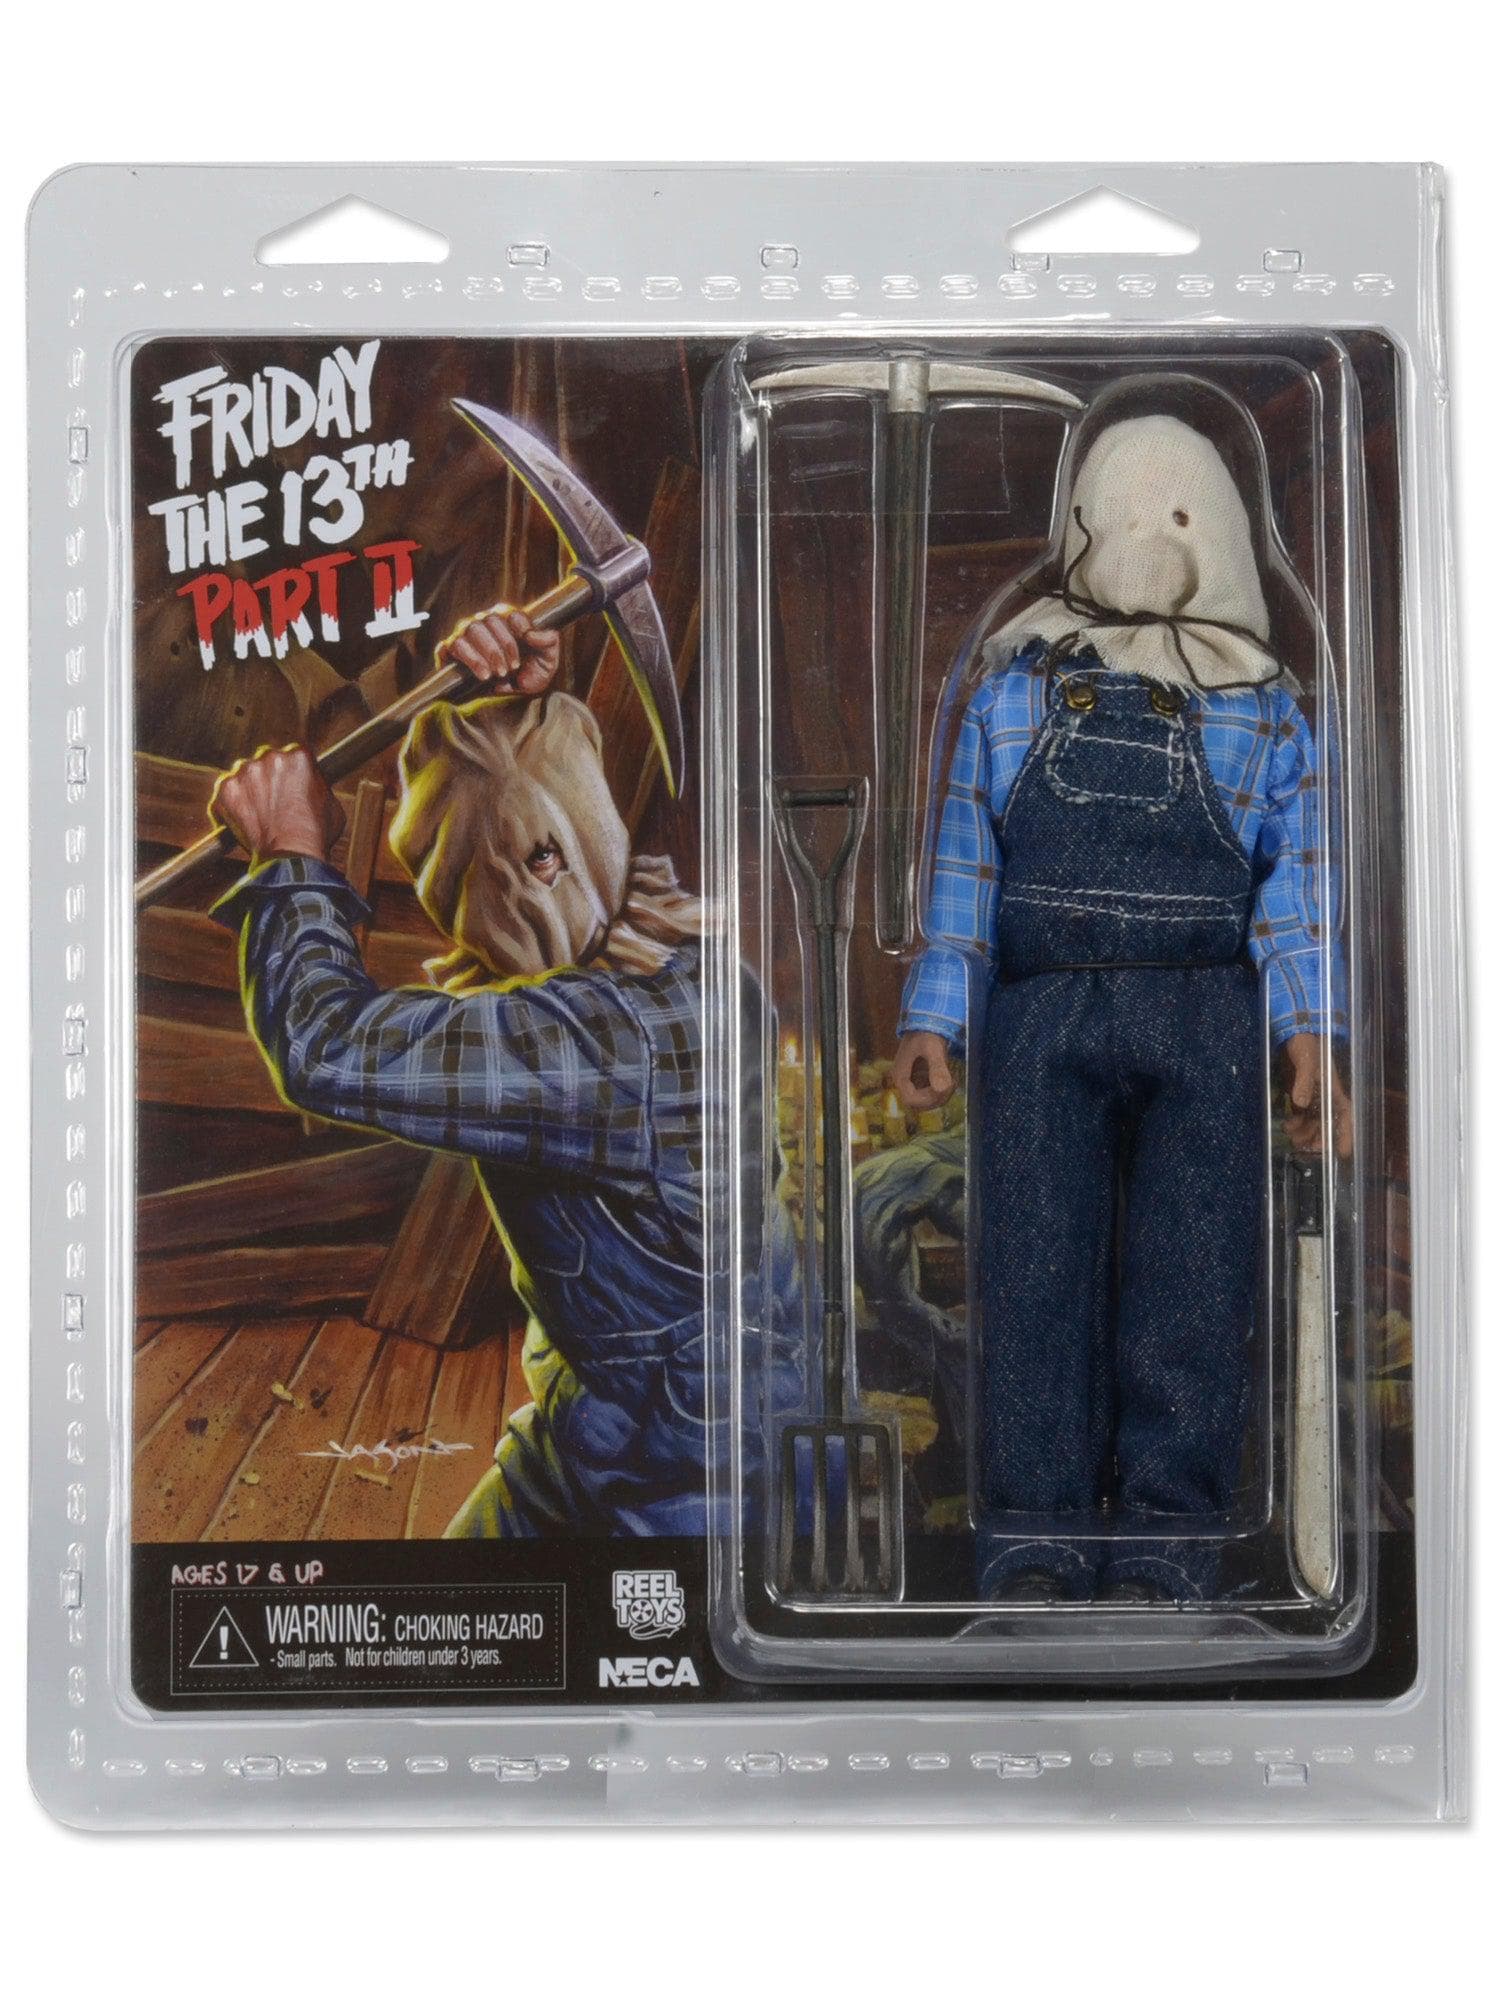 NECA - Friday the 13th - 8" Clothed Figure - Jason Part 2 - costumes.com